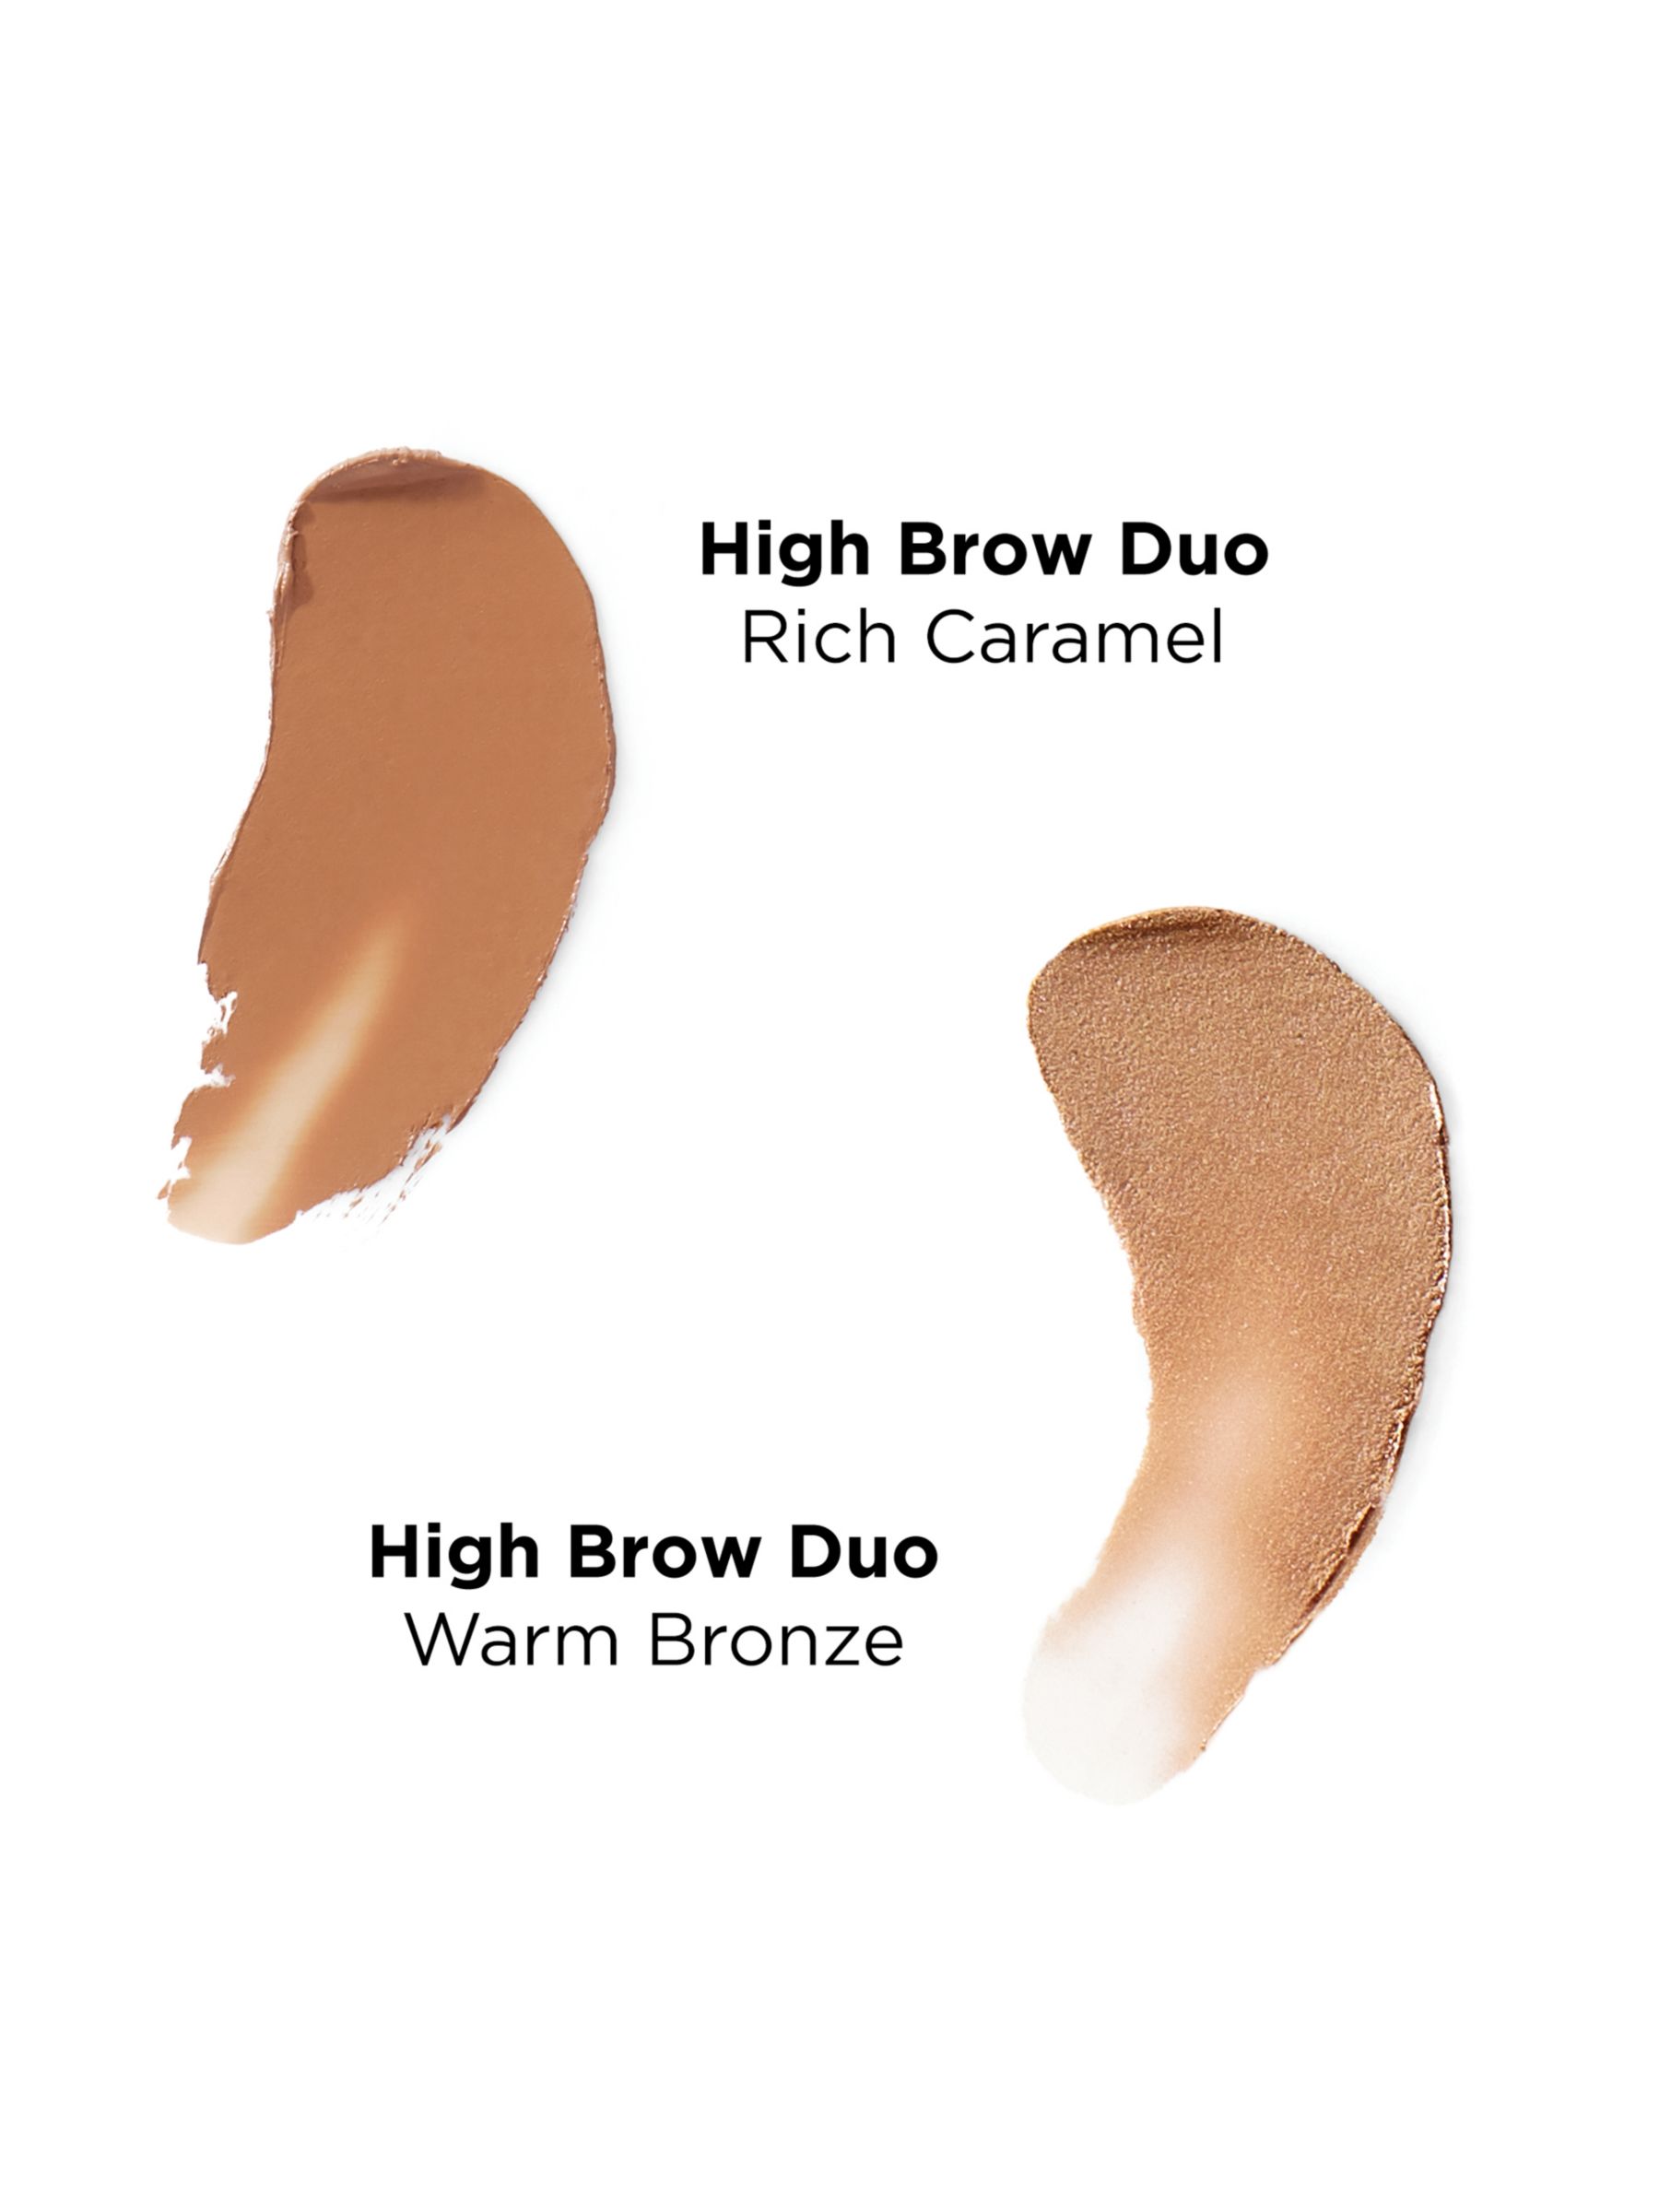 Benefit High Brow Duo Pencil Dual-Ended Brow Highlighting Pencil, Deep